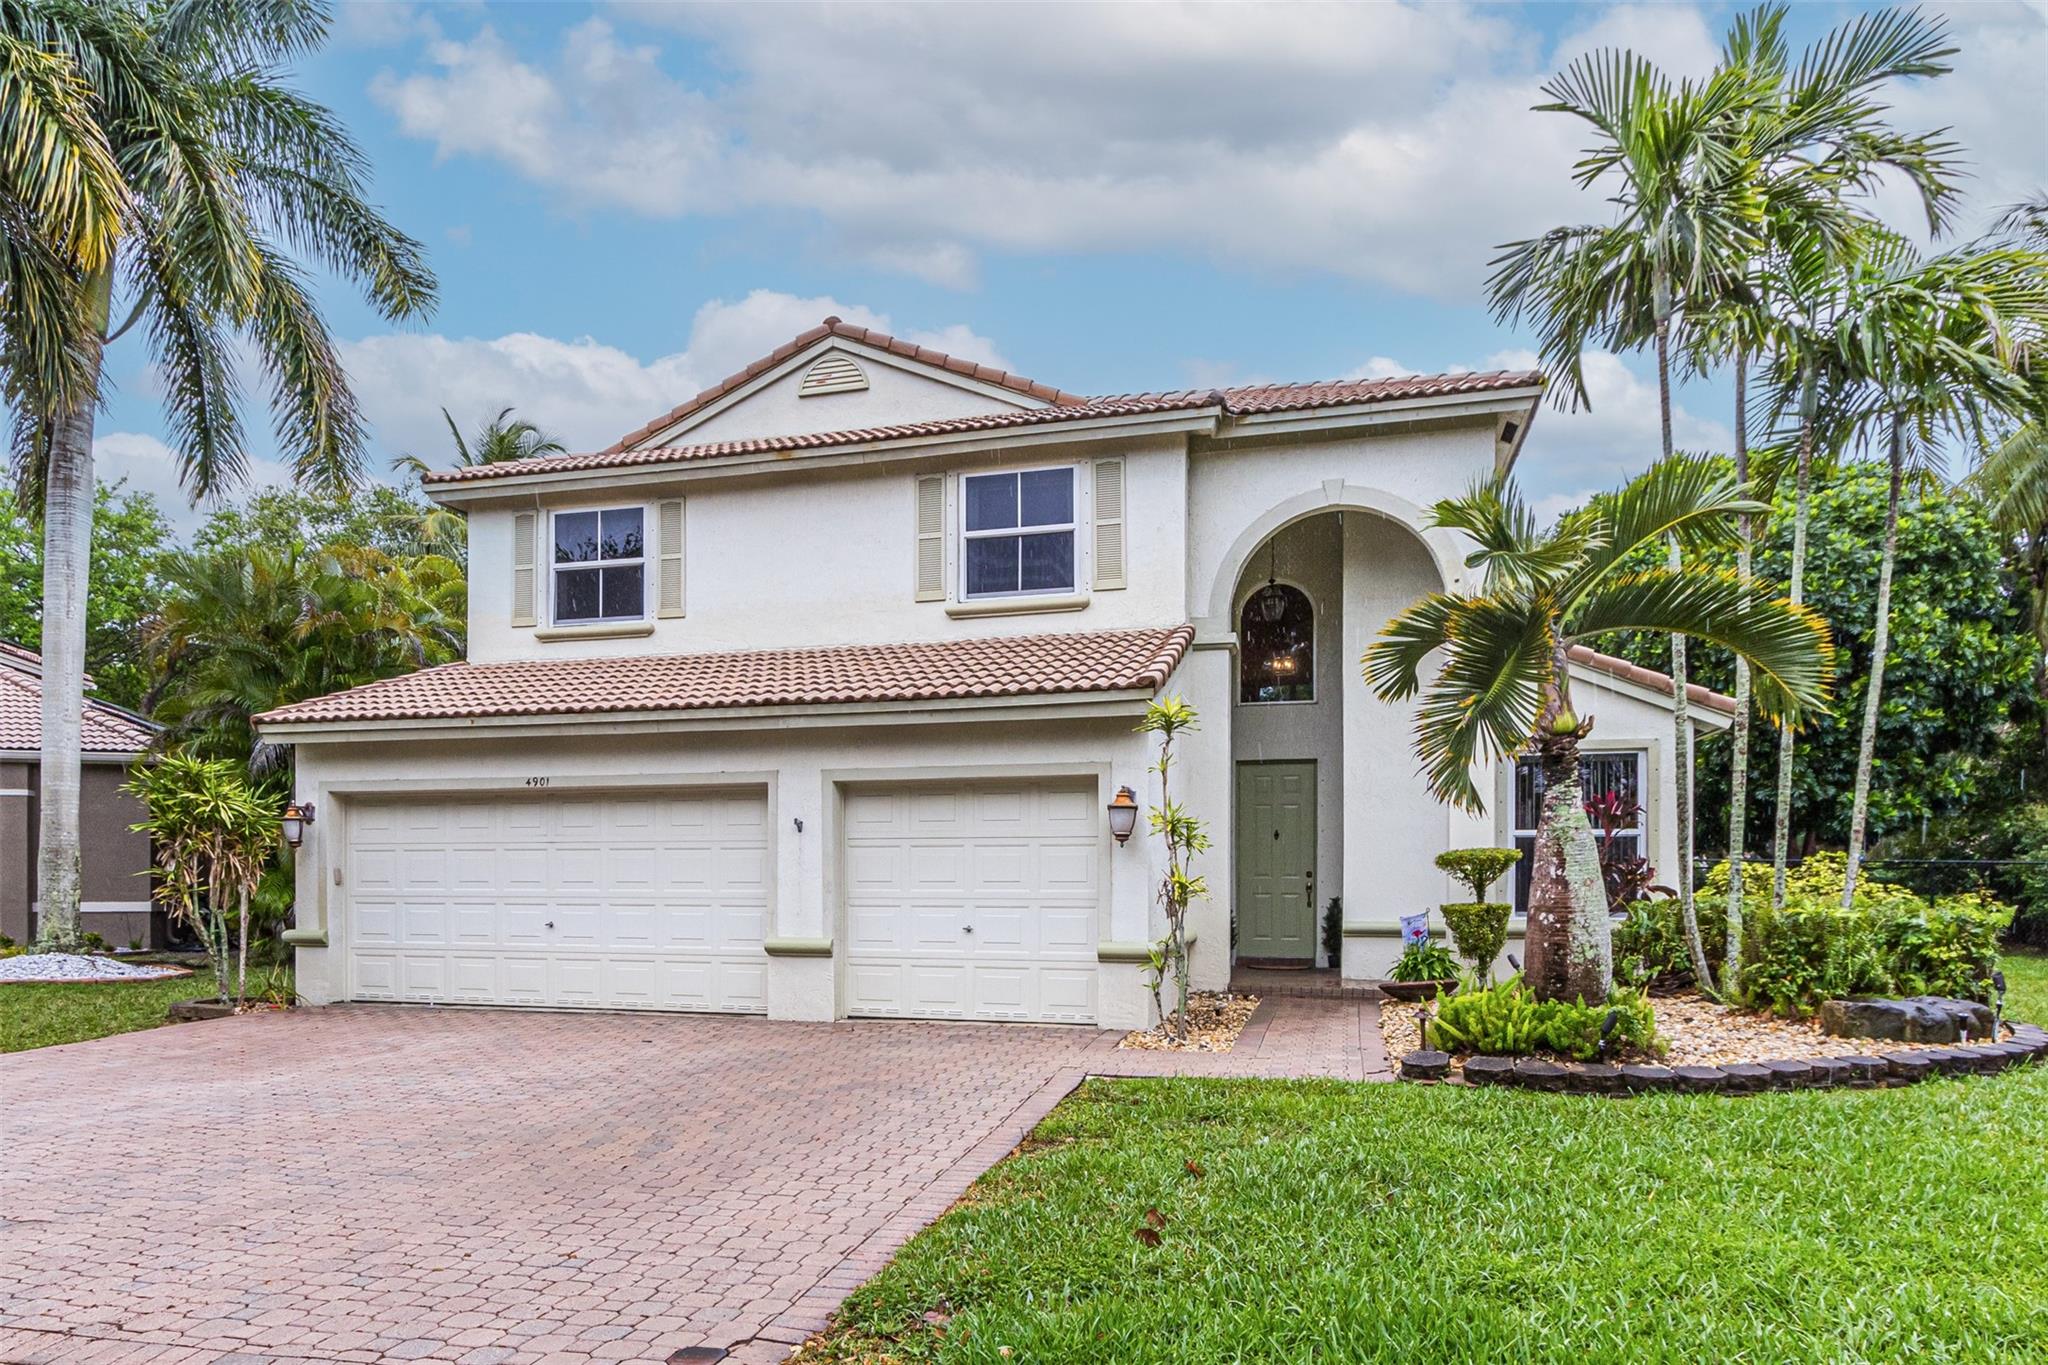 4901 NW 53rd Ave, Coconut Creek, FL 